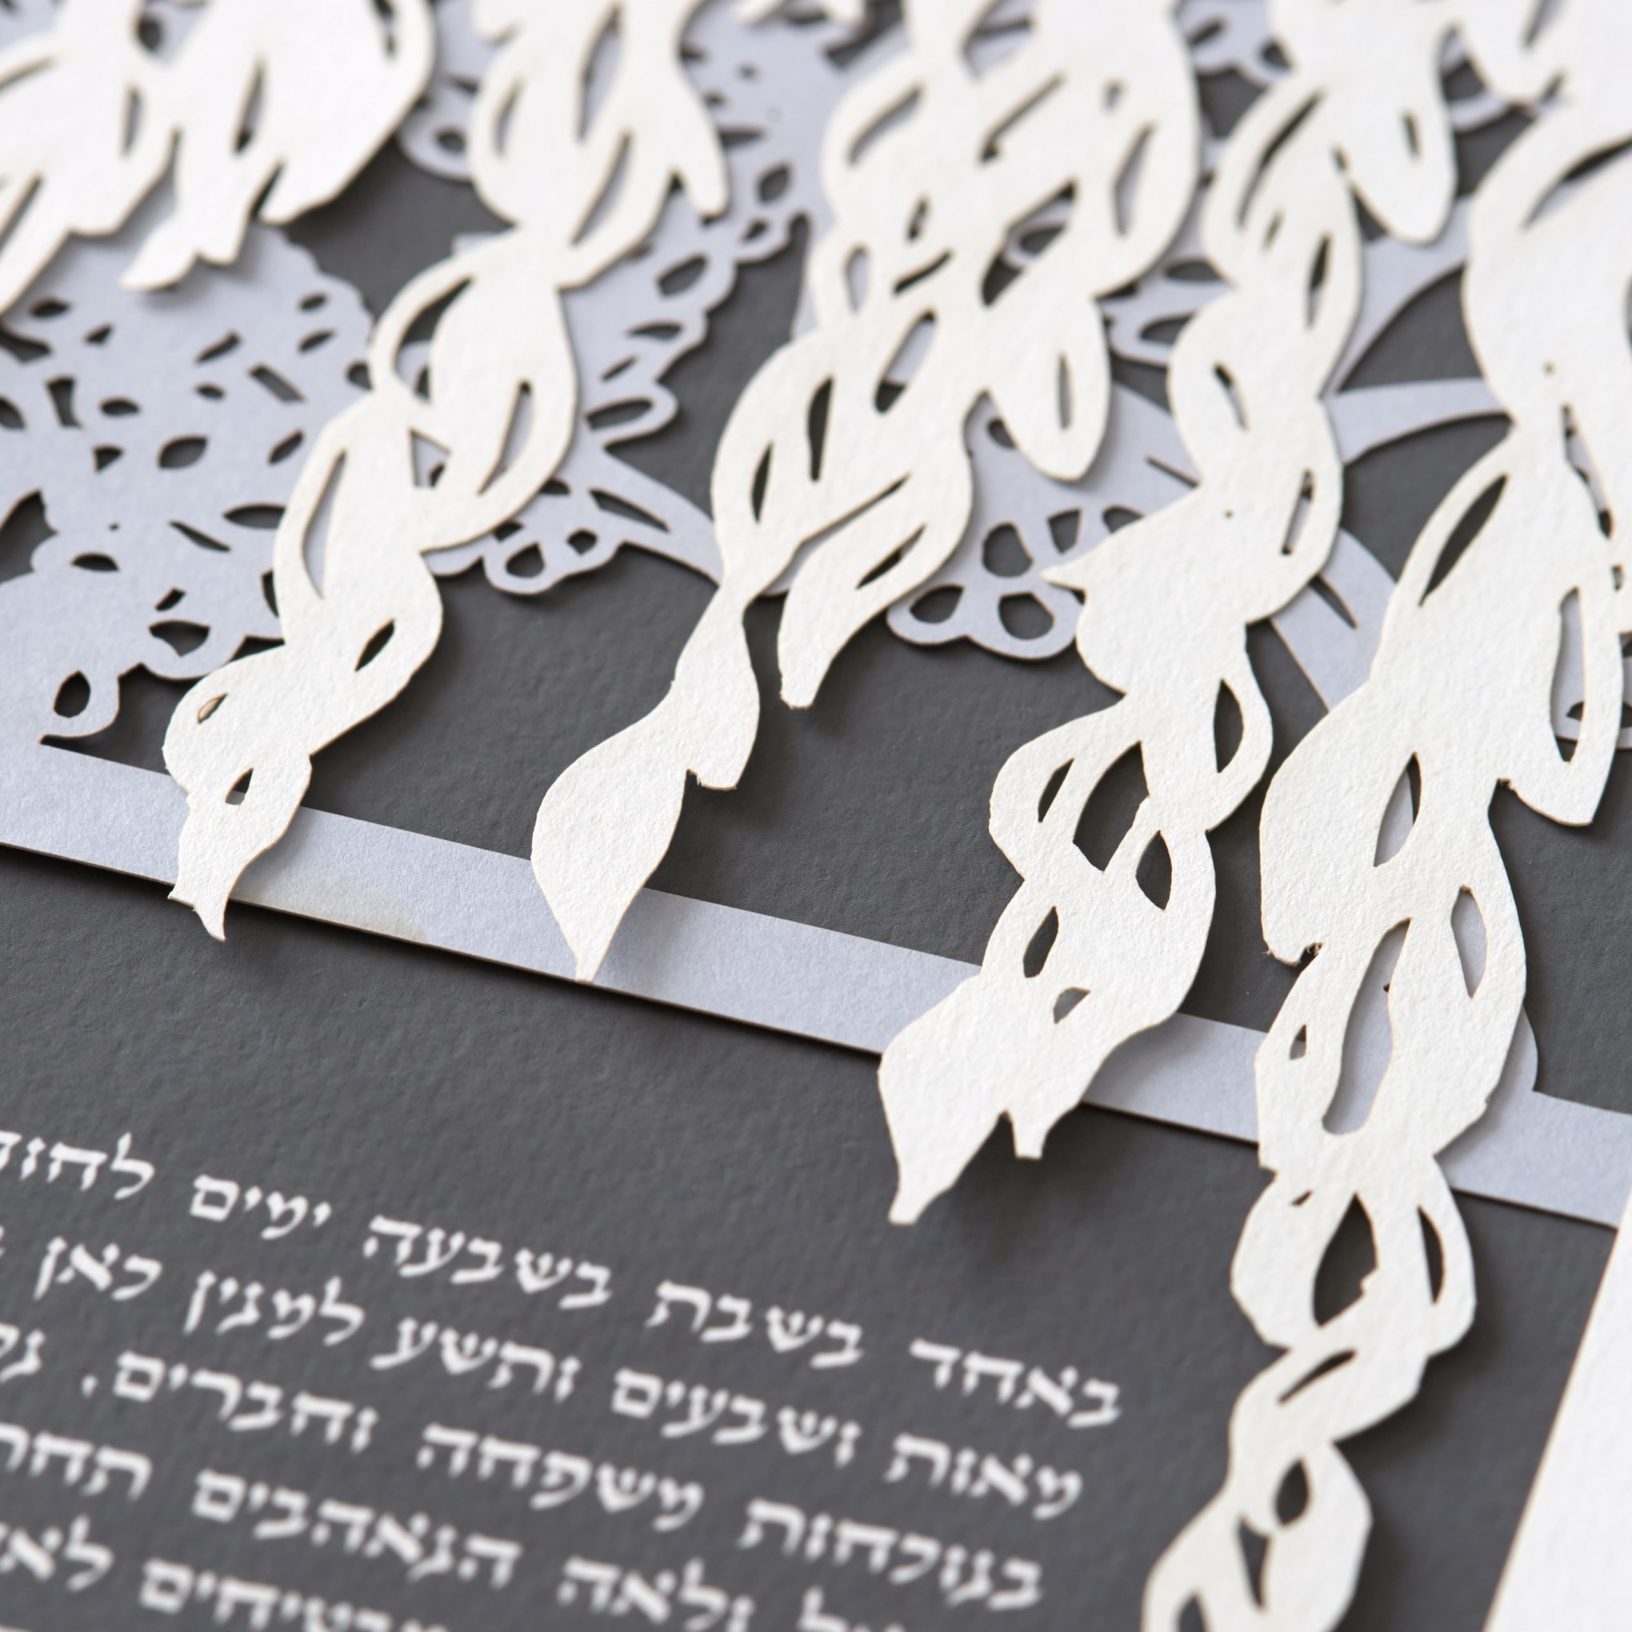 The Notebook Papercut Ketubah Designs by Melody Molayem